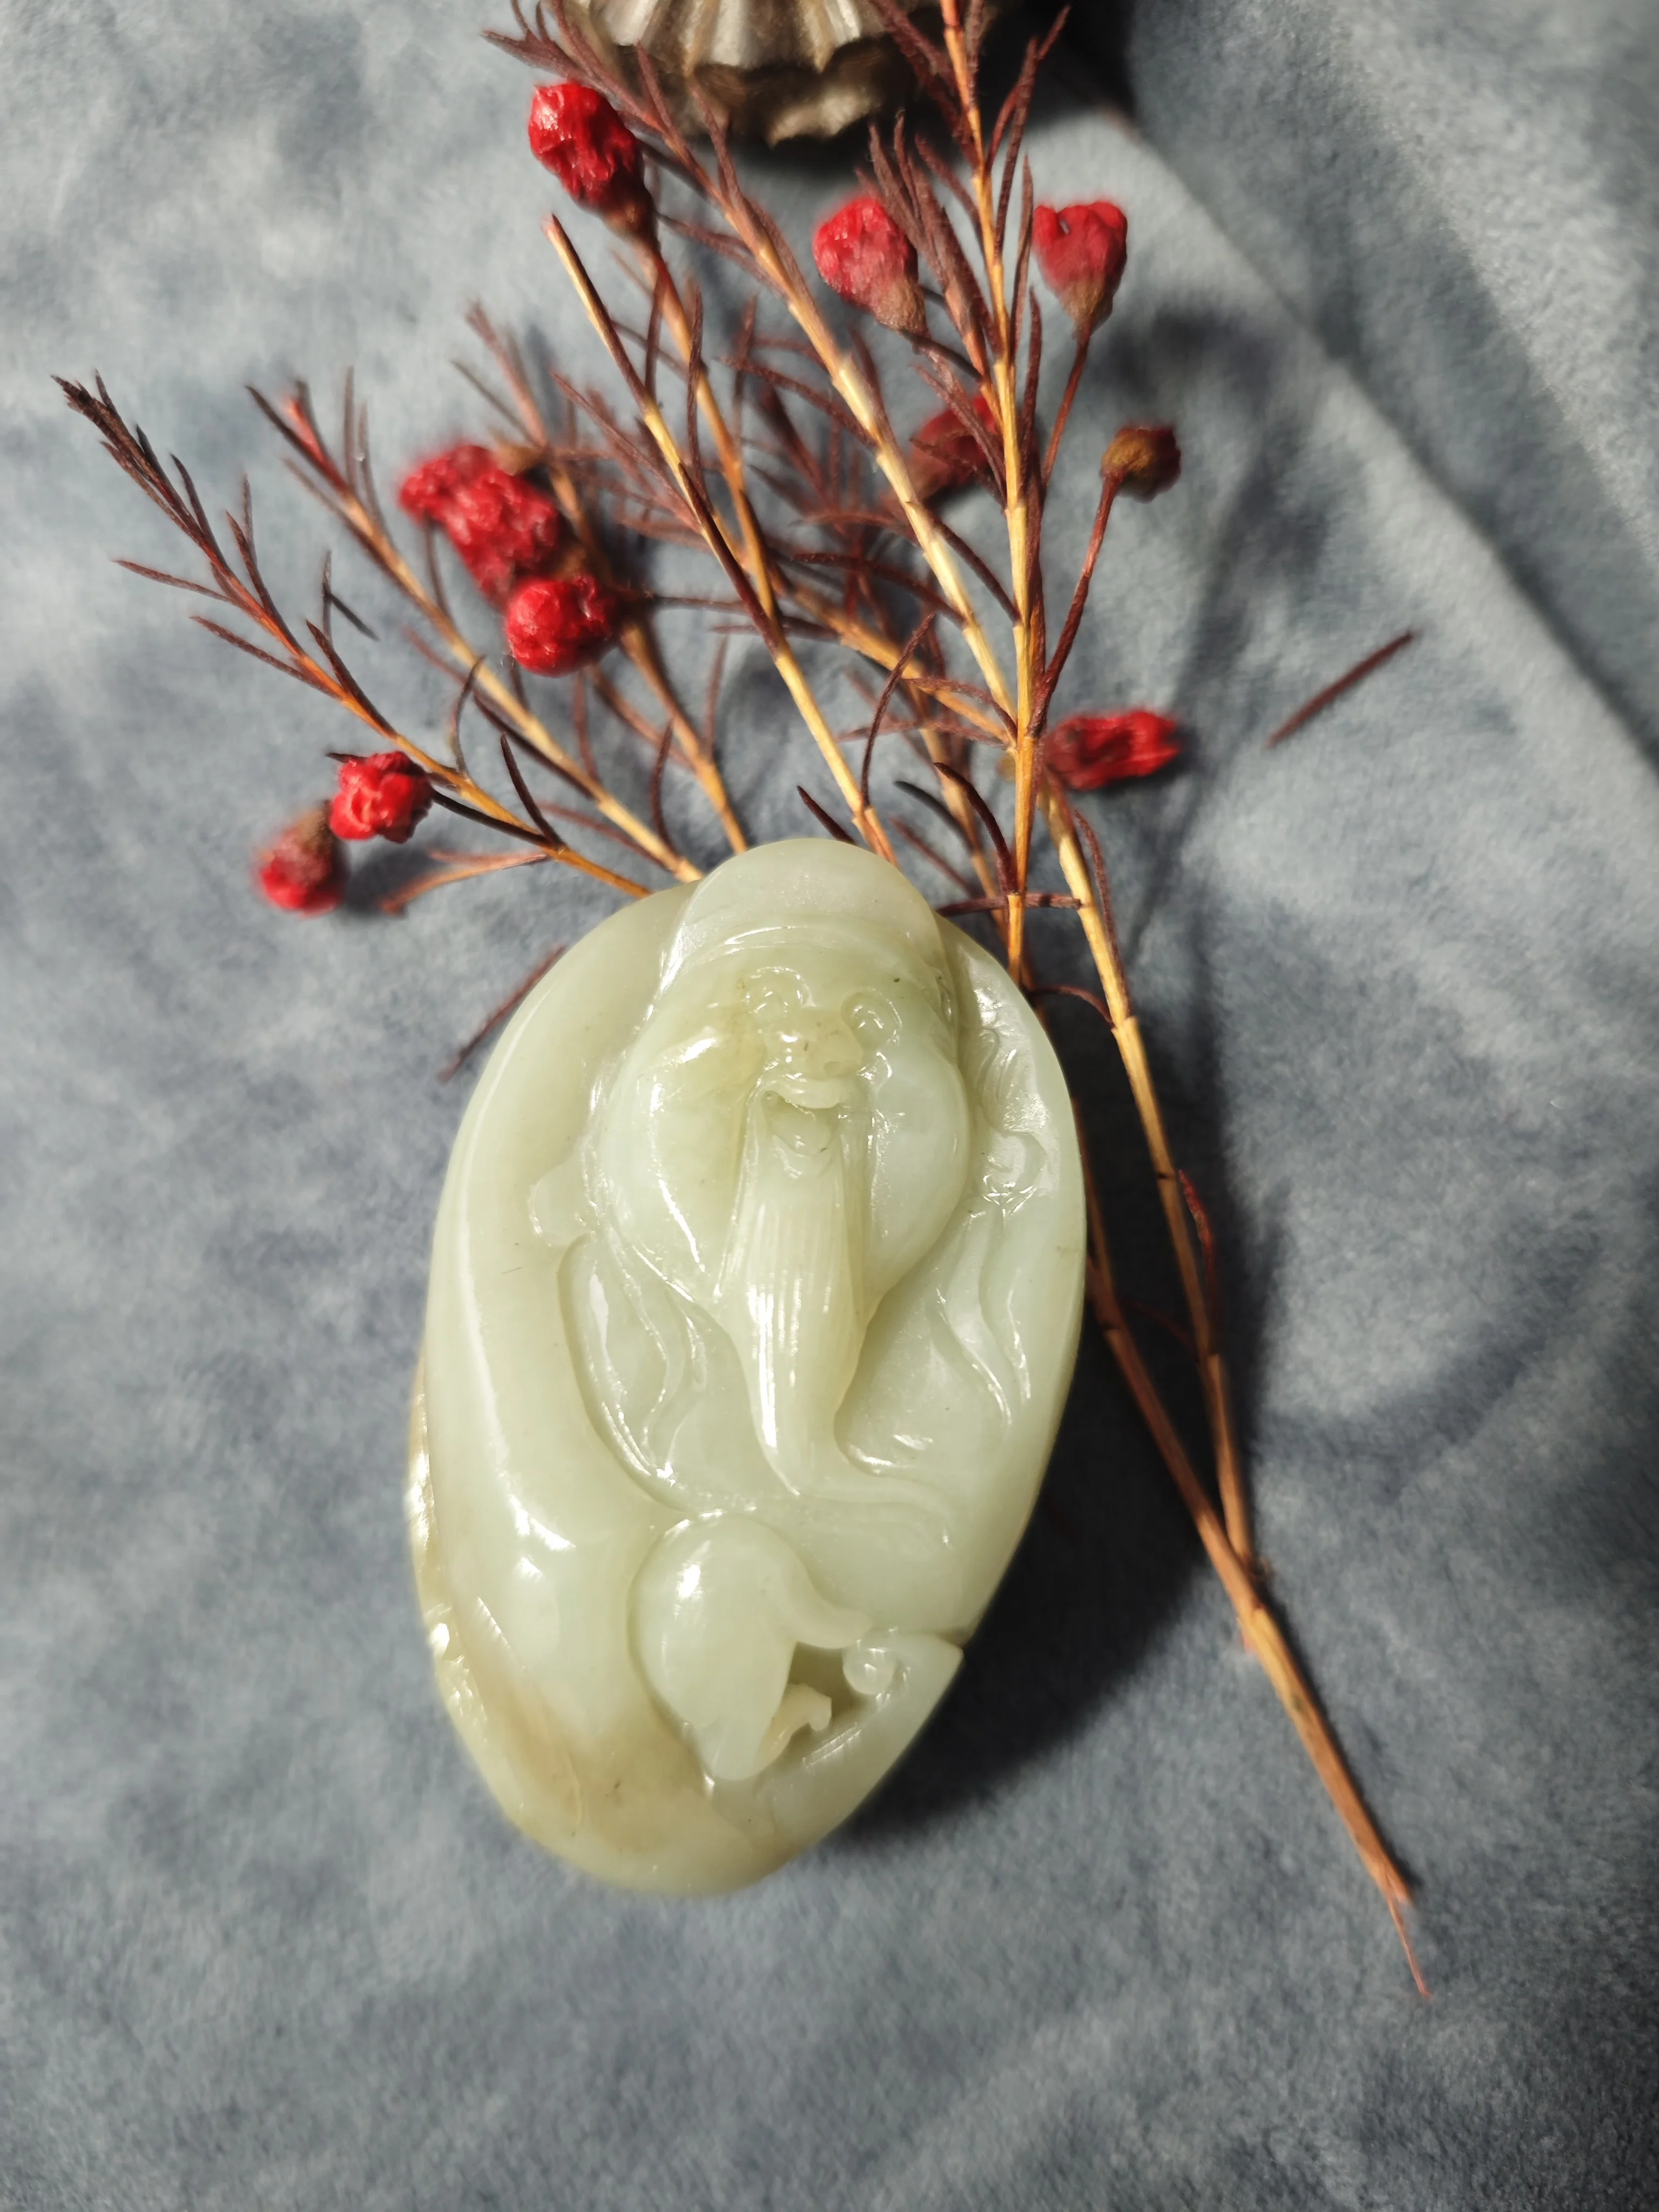 

Chinese Exquisite Jade Carving Auspicious "The God Of Wealth" Ornaments/Pendants Stone Handicrafts Home Decoration Collection